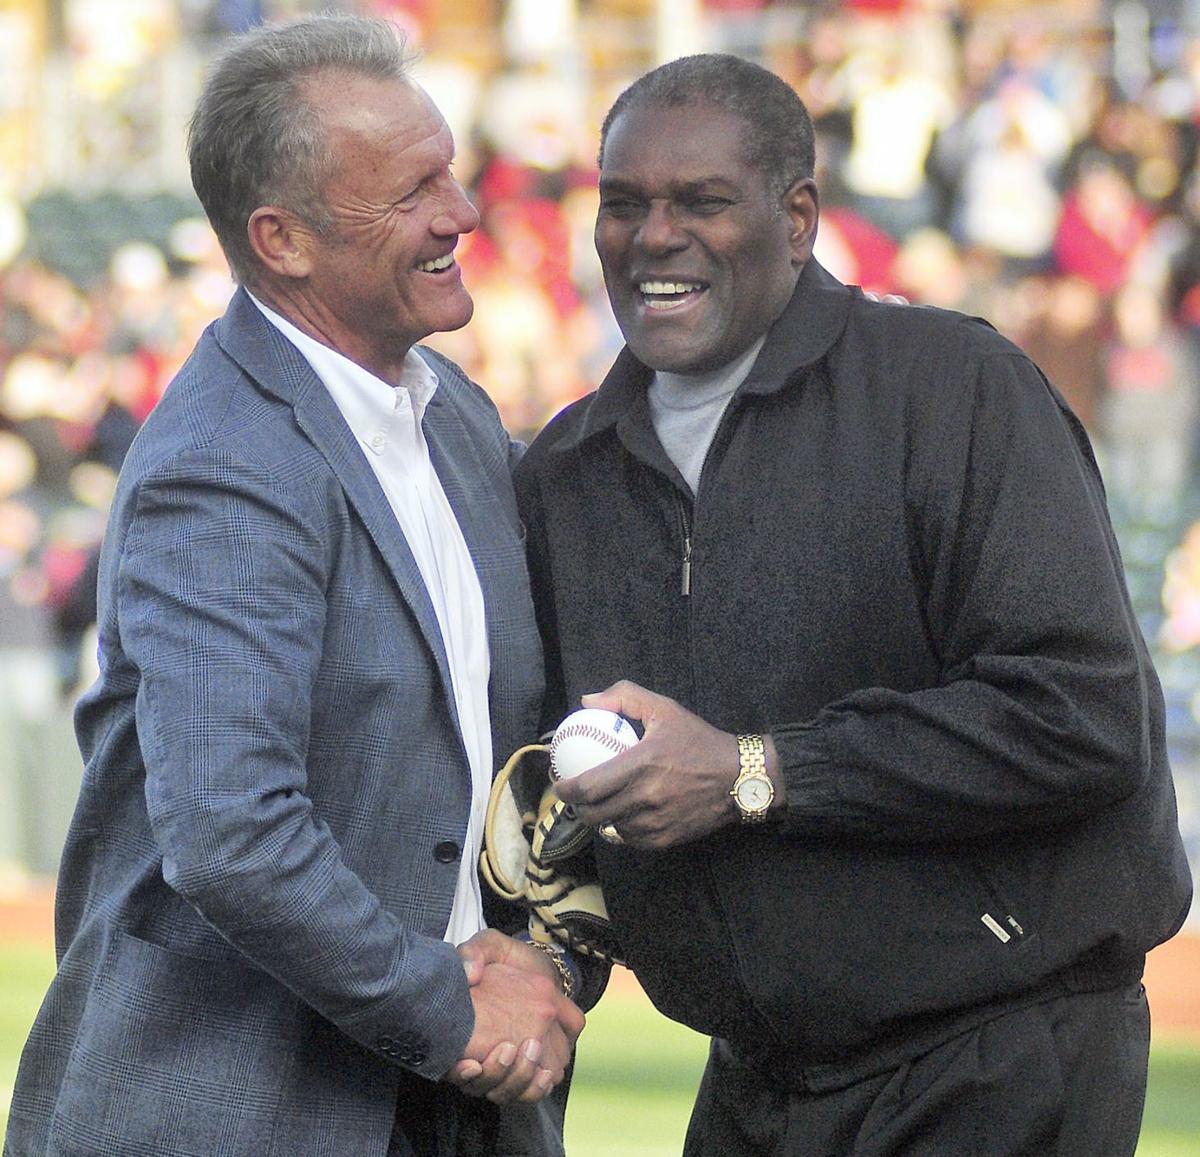 Shatel: Bob Gibson was a private man, but those close to him